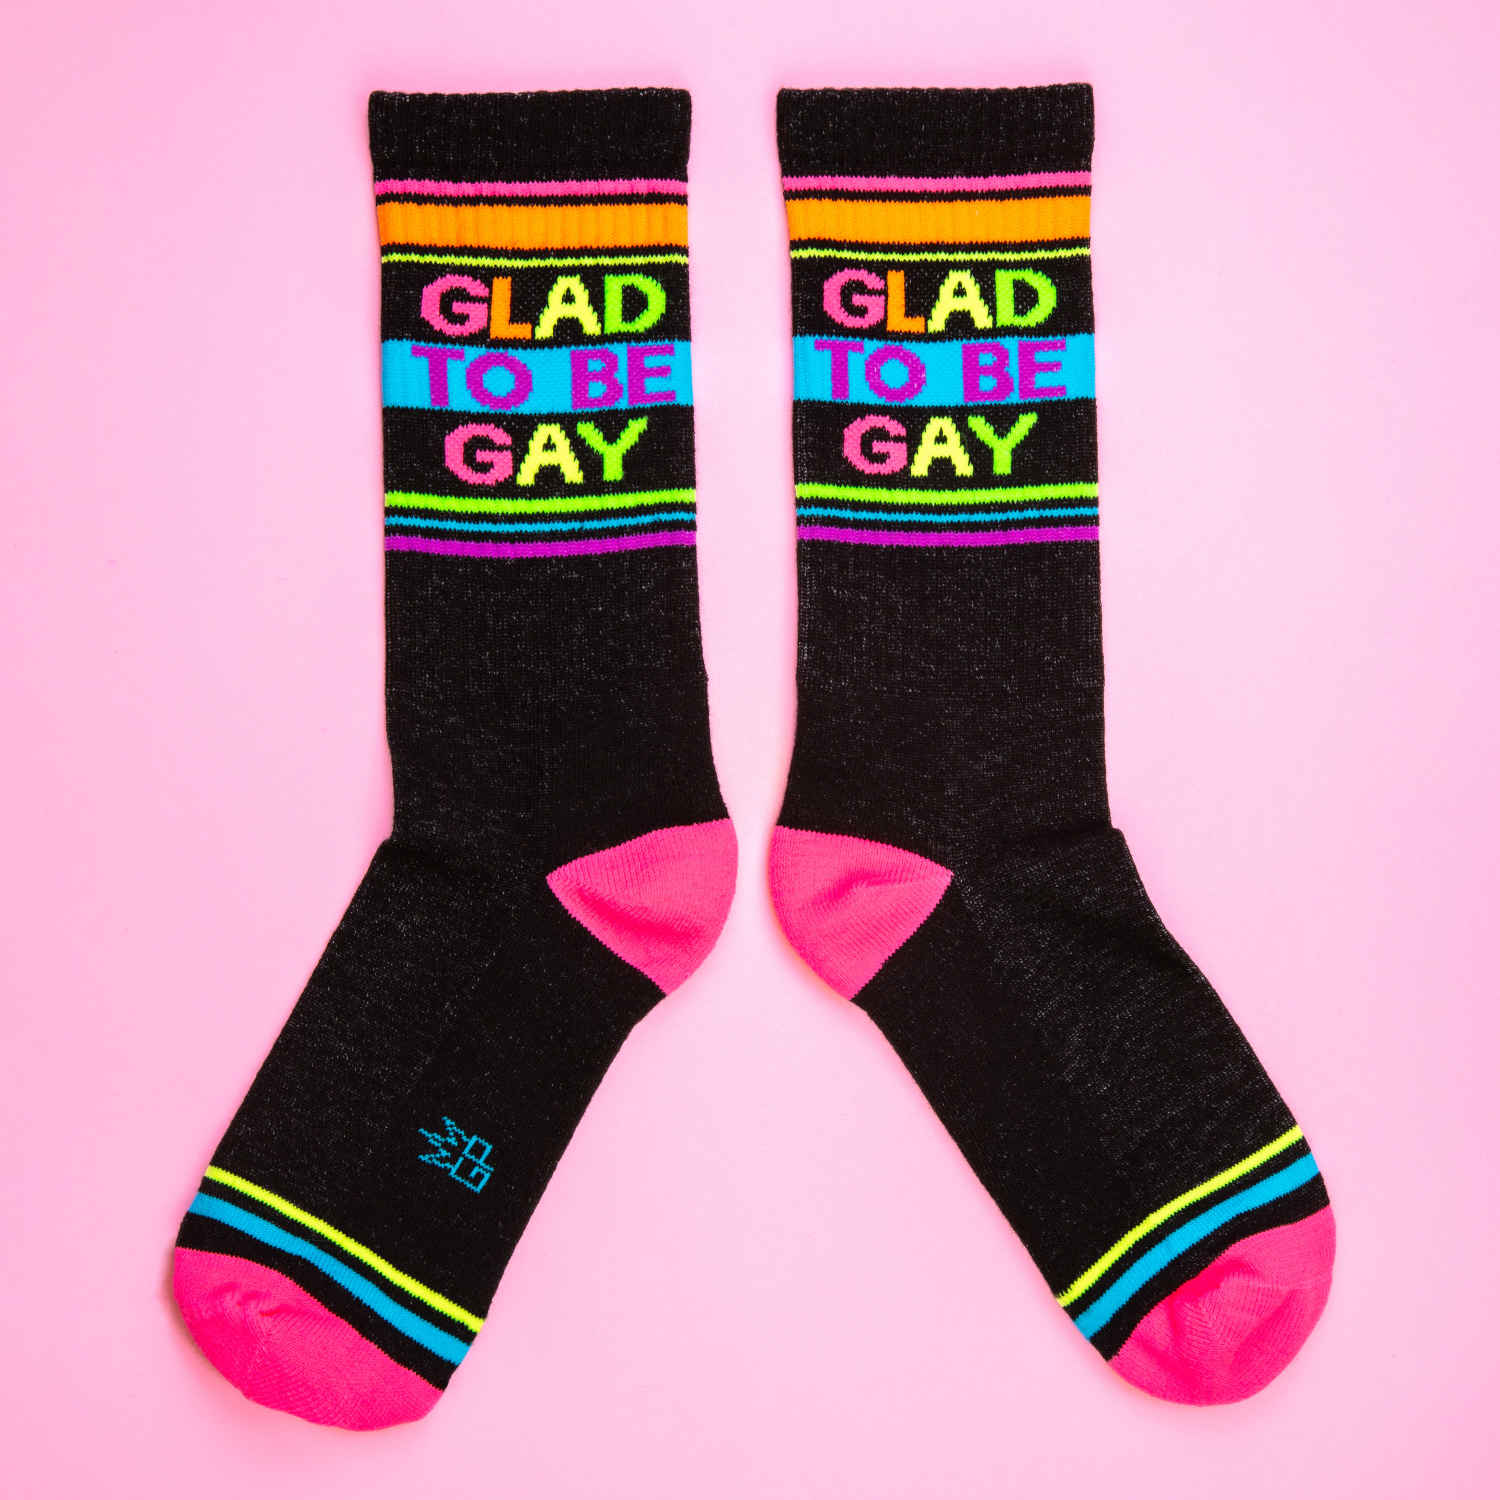 GLAD TO BE GAY CREW SOCKS